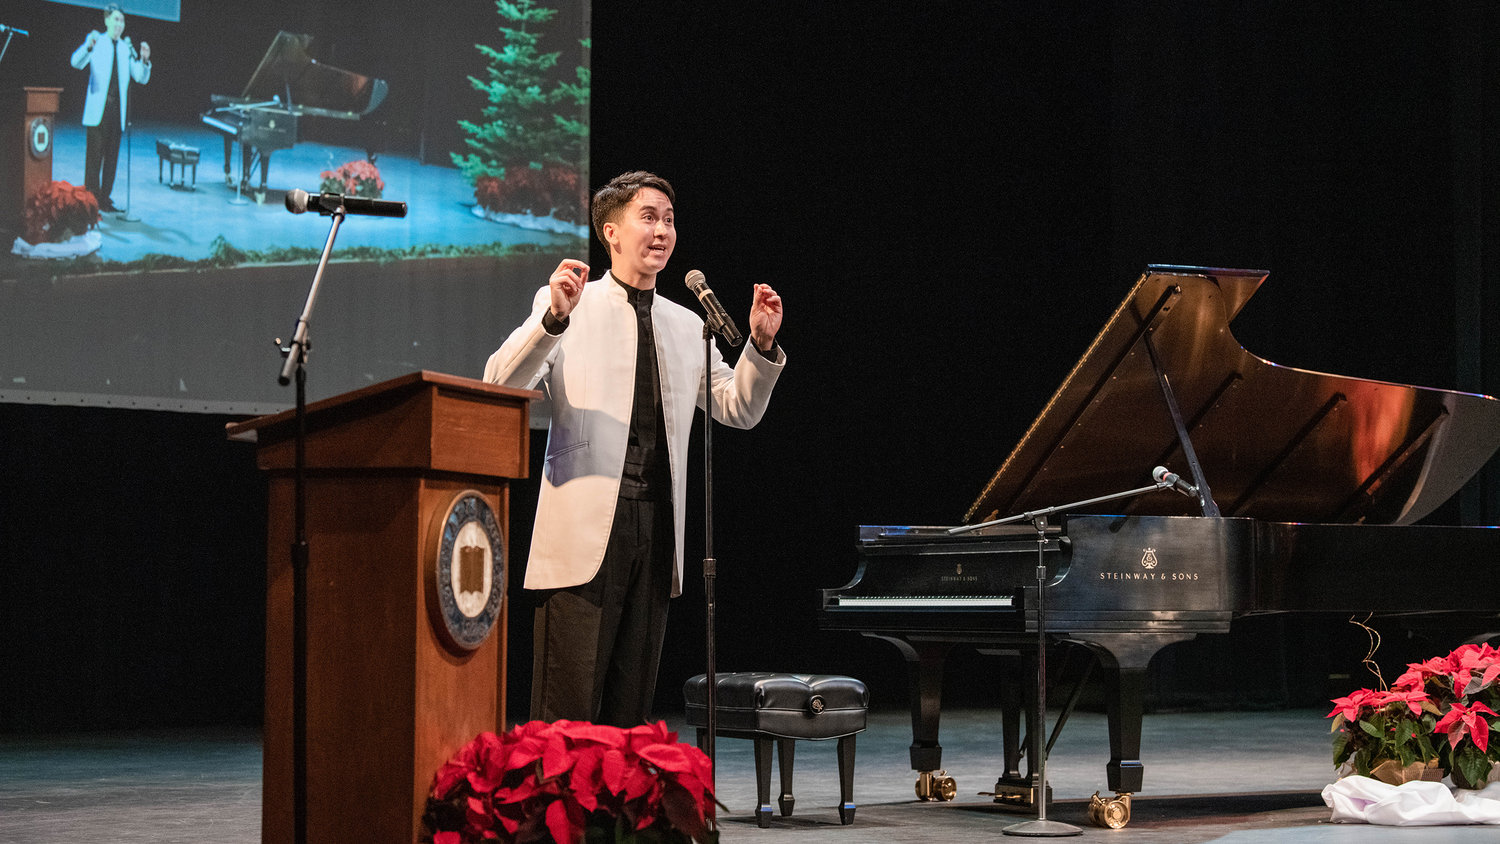 Piano virtuoso Charlie Albright talks to attendees gathered in the Corbet Theatre Friday evening for a “Classical Christmas Fundraiser Concert,” with proceeds going to the Charlie Albright Scholarship at Centralia College.